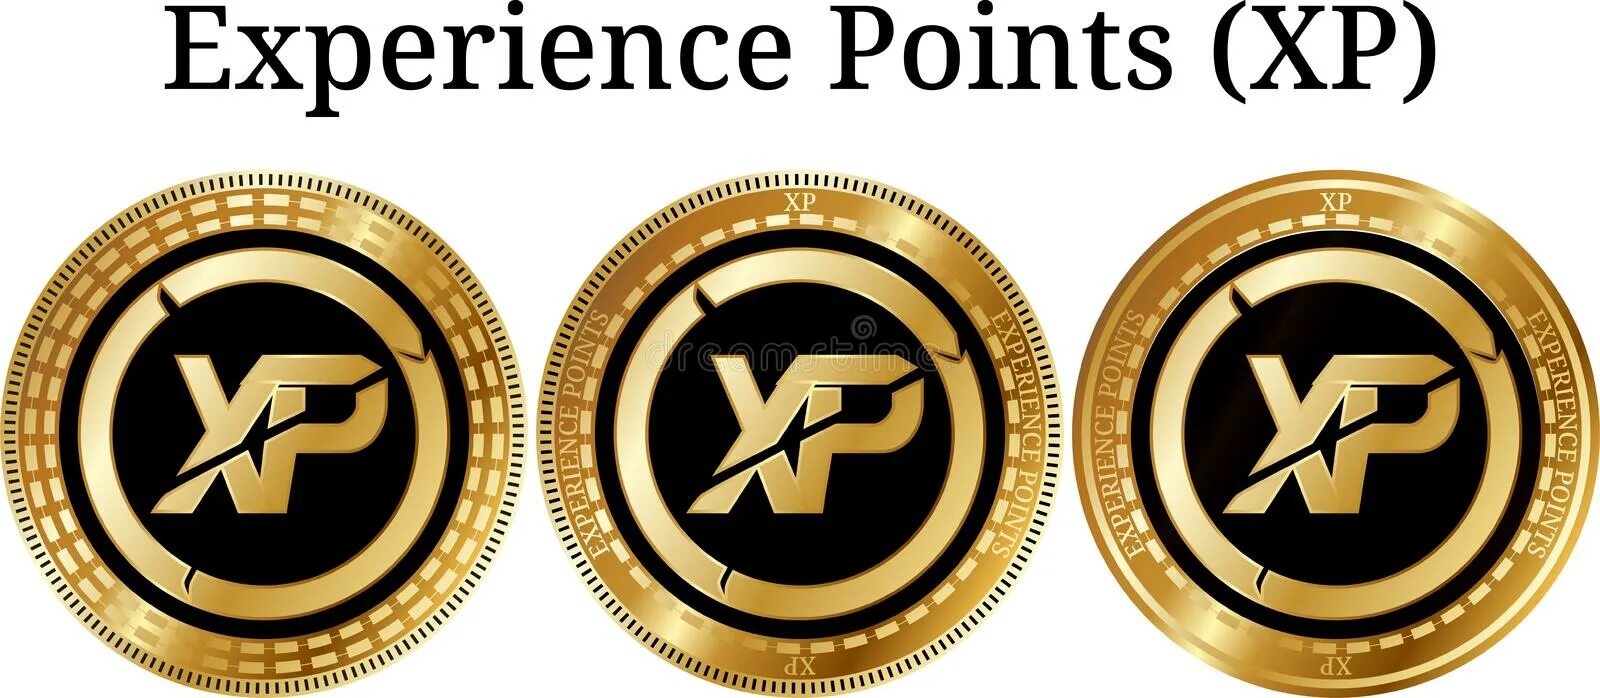 Golden Coin шины. Experience points XP. 3 Experience points. Experience points